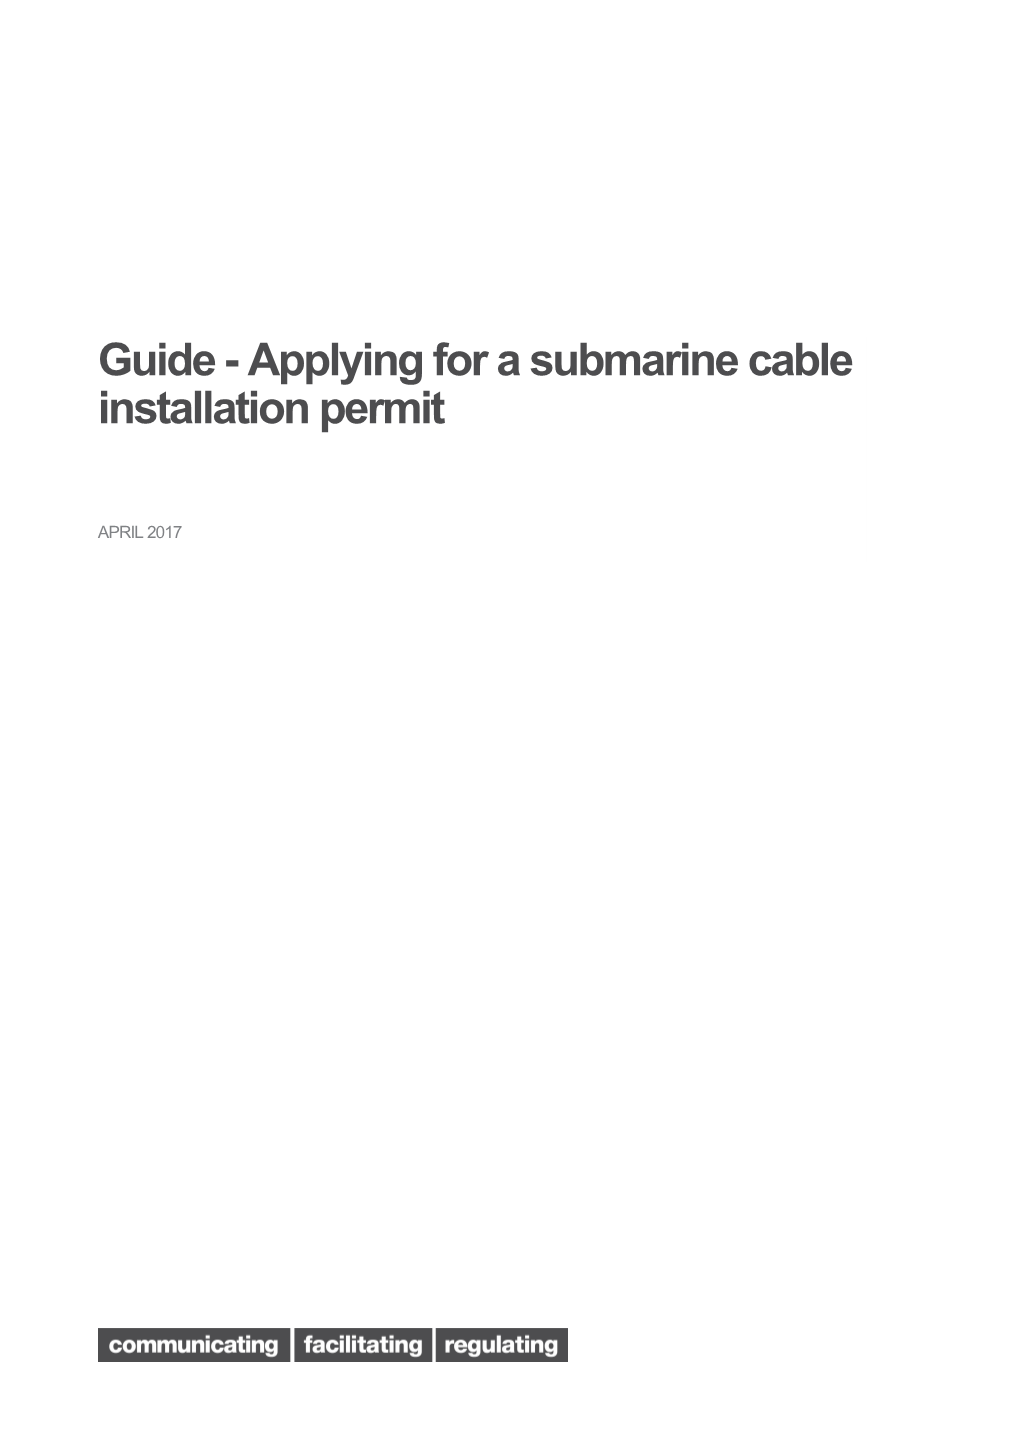 T020 - Guide to Applying for a Permit to Install a Submarine Cable in Australian Waters